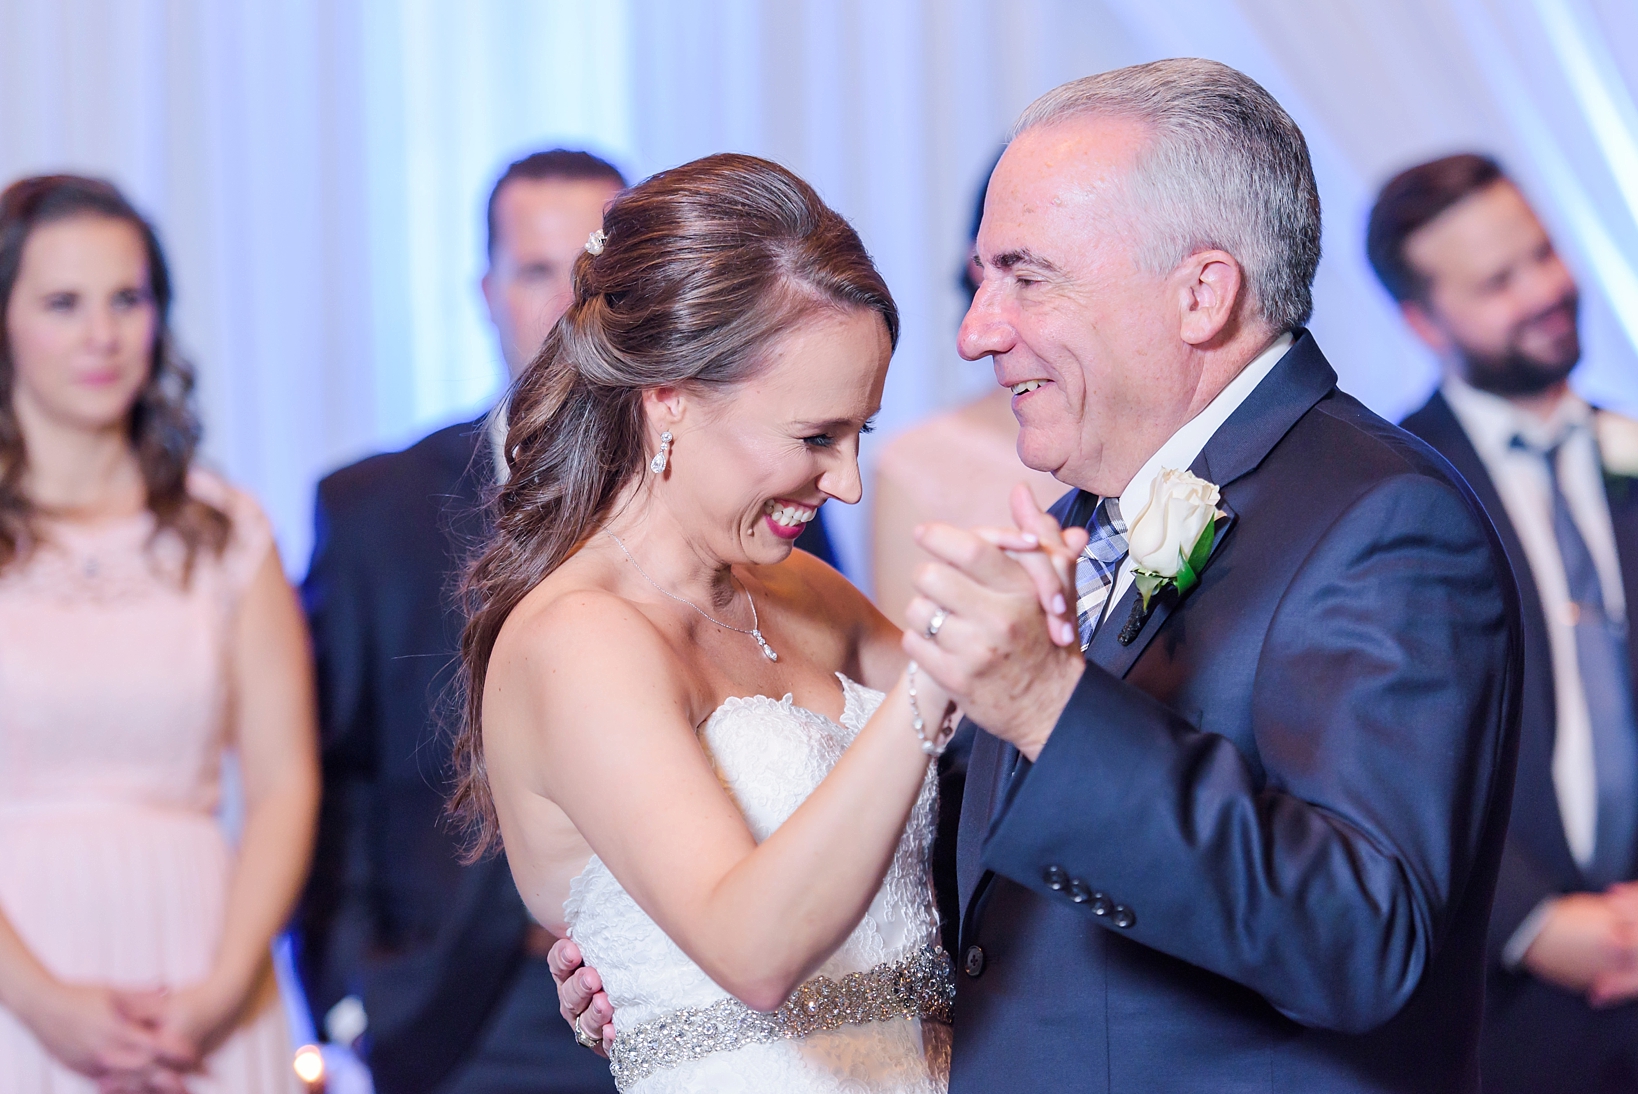 Bride shares a laugh during the Father/Daughter dance with the Bridal Party looking on by Sarah & Ben Photography